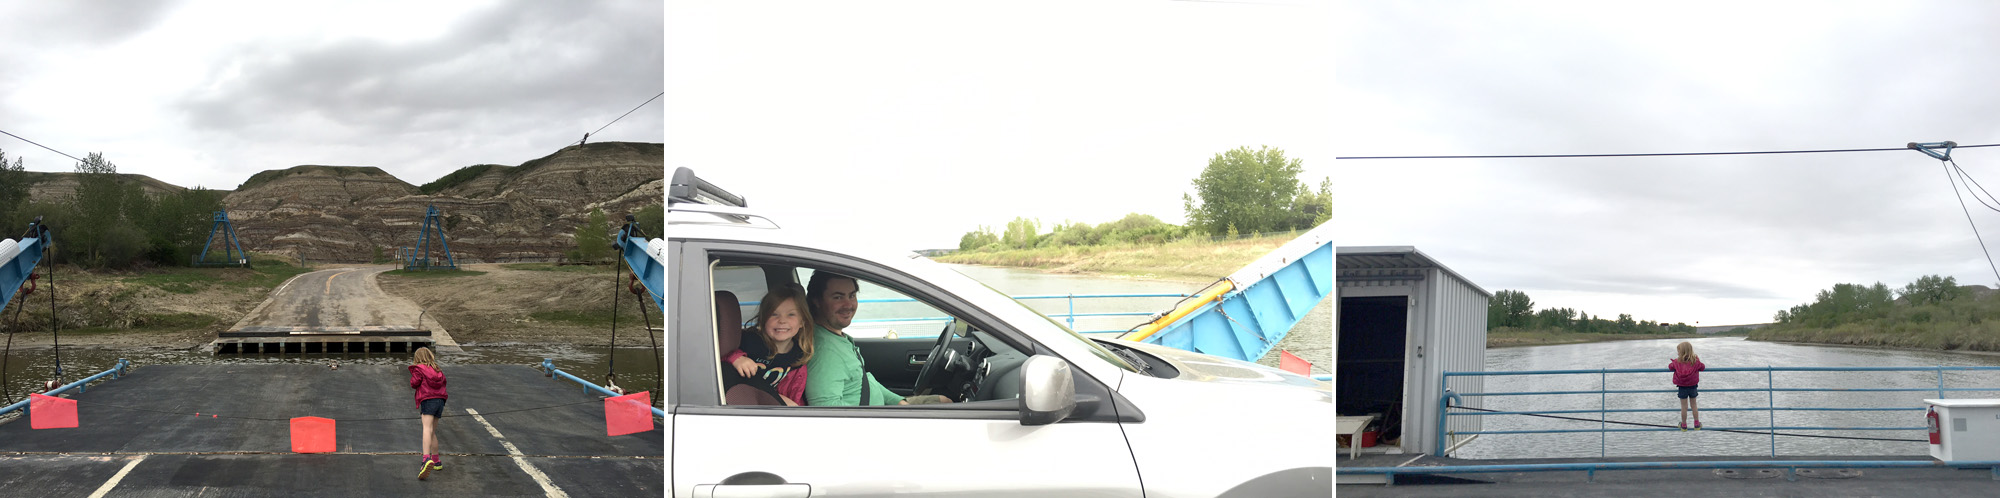 ferry-drumheller-with-kids